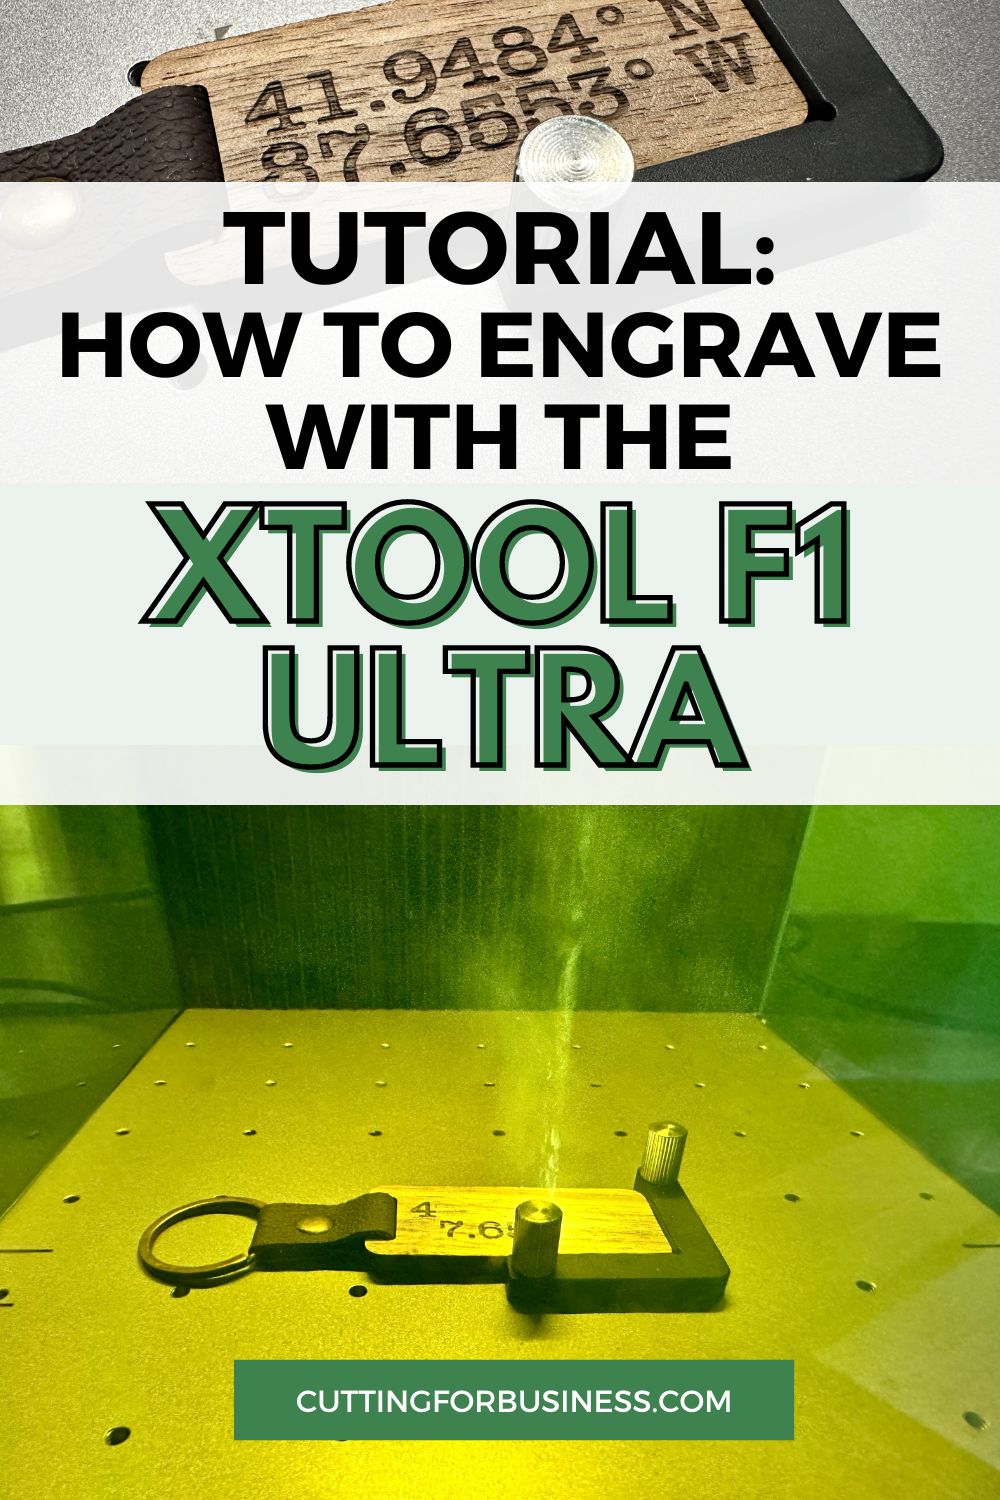 Tutorial: Engraving with the xTool F1 Ultra - cuttingforbusiness.com.